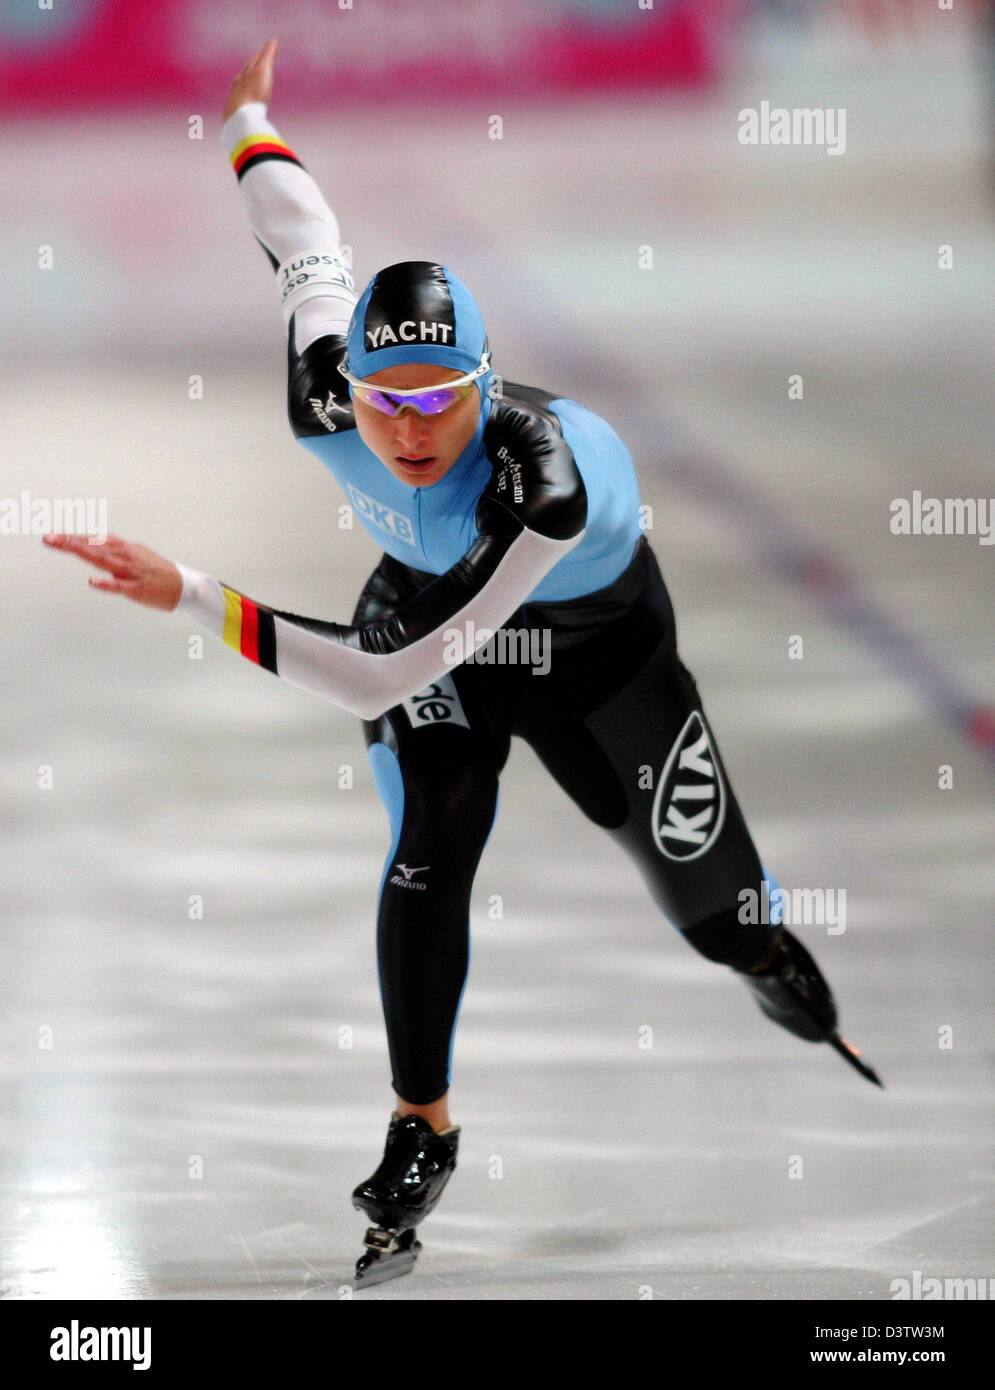 German speed skater Pamela Zoellner photographed during the women's 1,000 metre competition of the speed skating world cup in Berlin, Germany, Sunday 19 November 2006. Zoellner came in 17th with 1:18.25 minutes. Photo: Gero Breloer Stock Photo